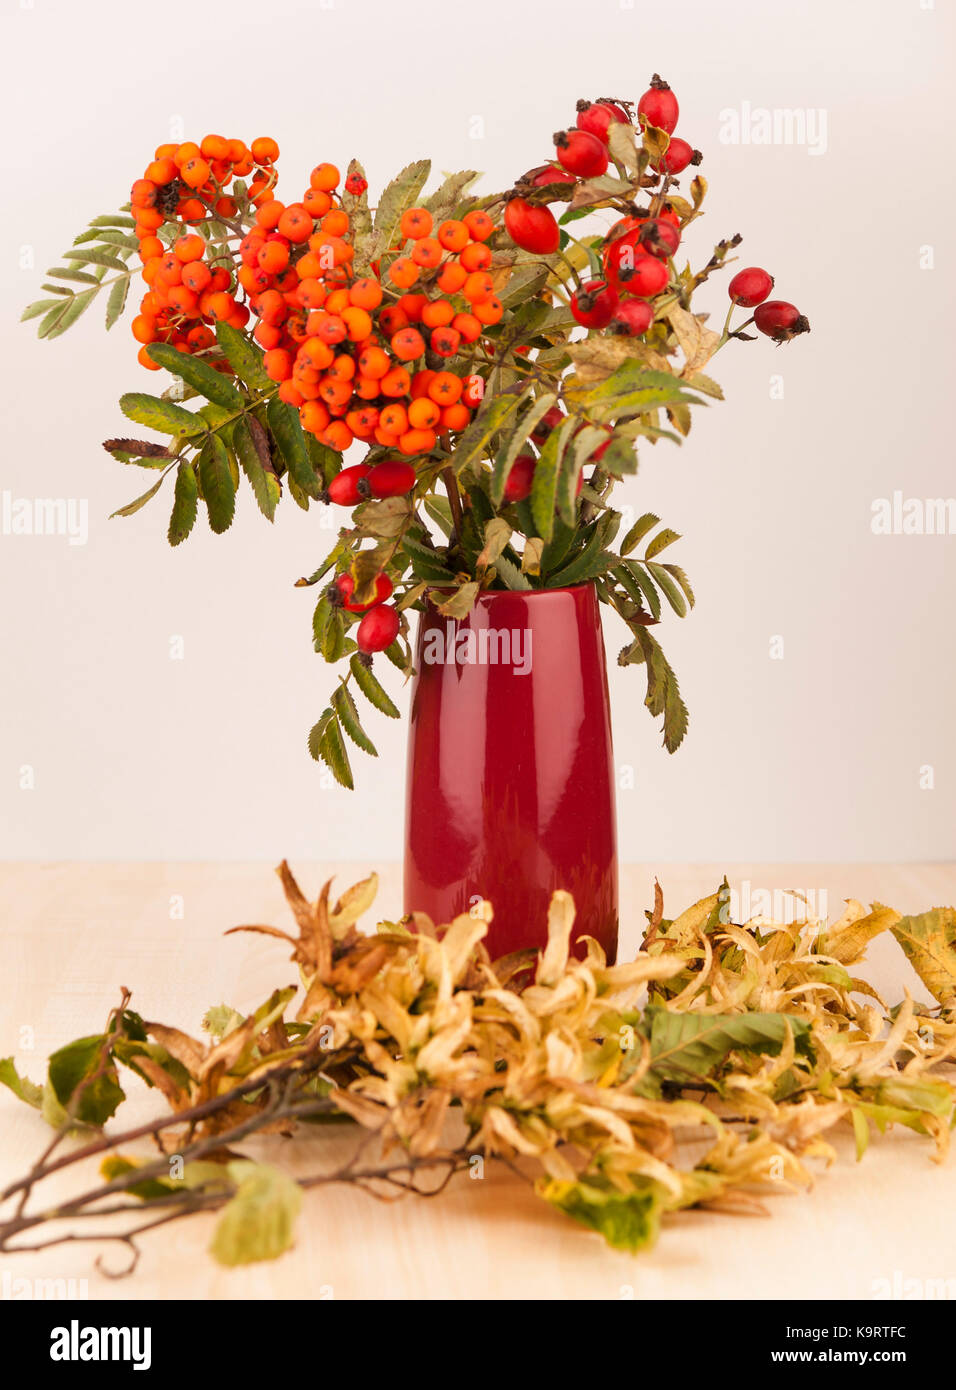 Autumn decoration in purple vase made from rowanberry and wild rose hips Stock Photo